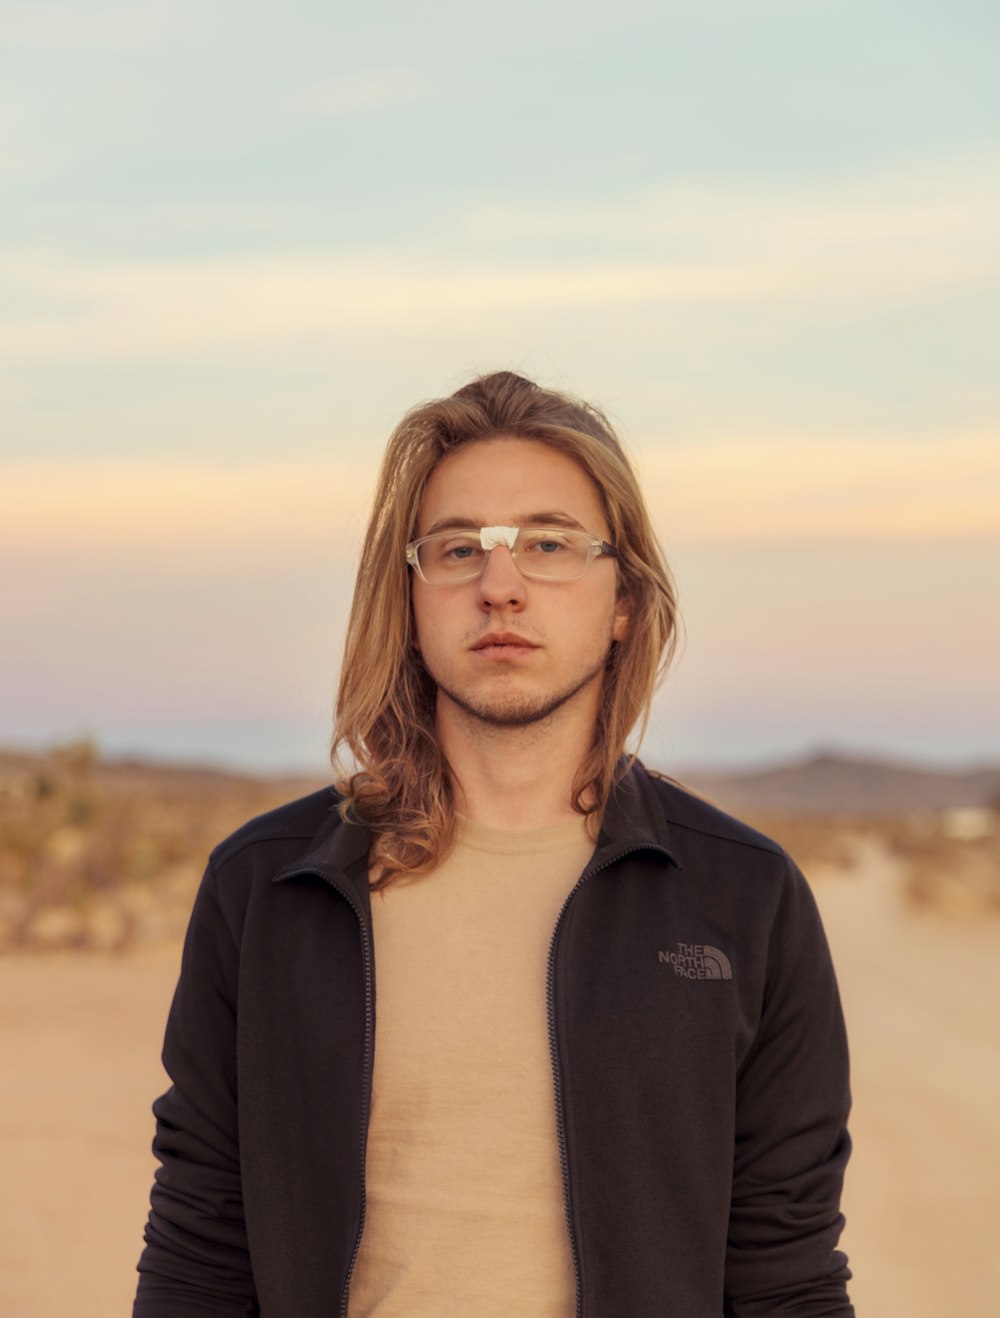 a man with long hair and glasses standing in the desert